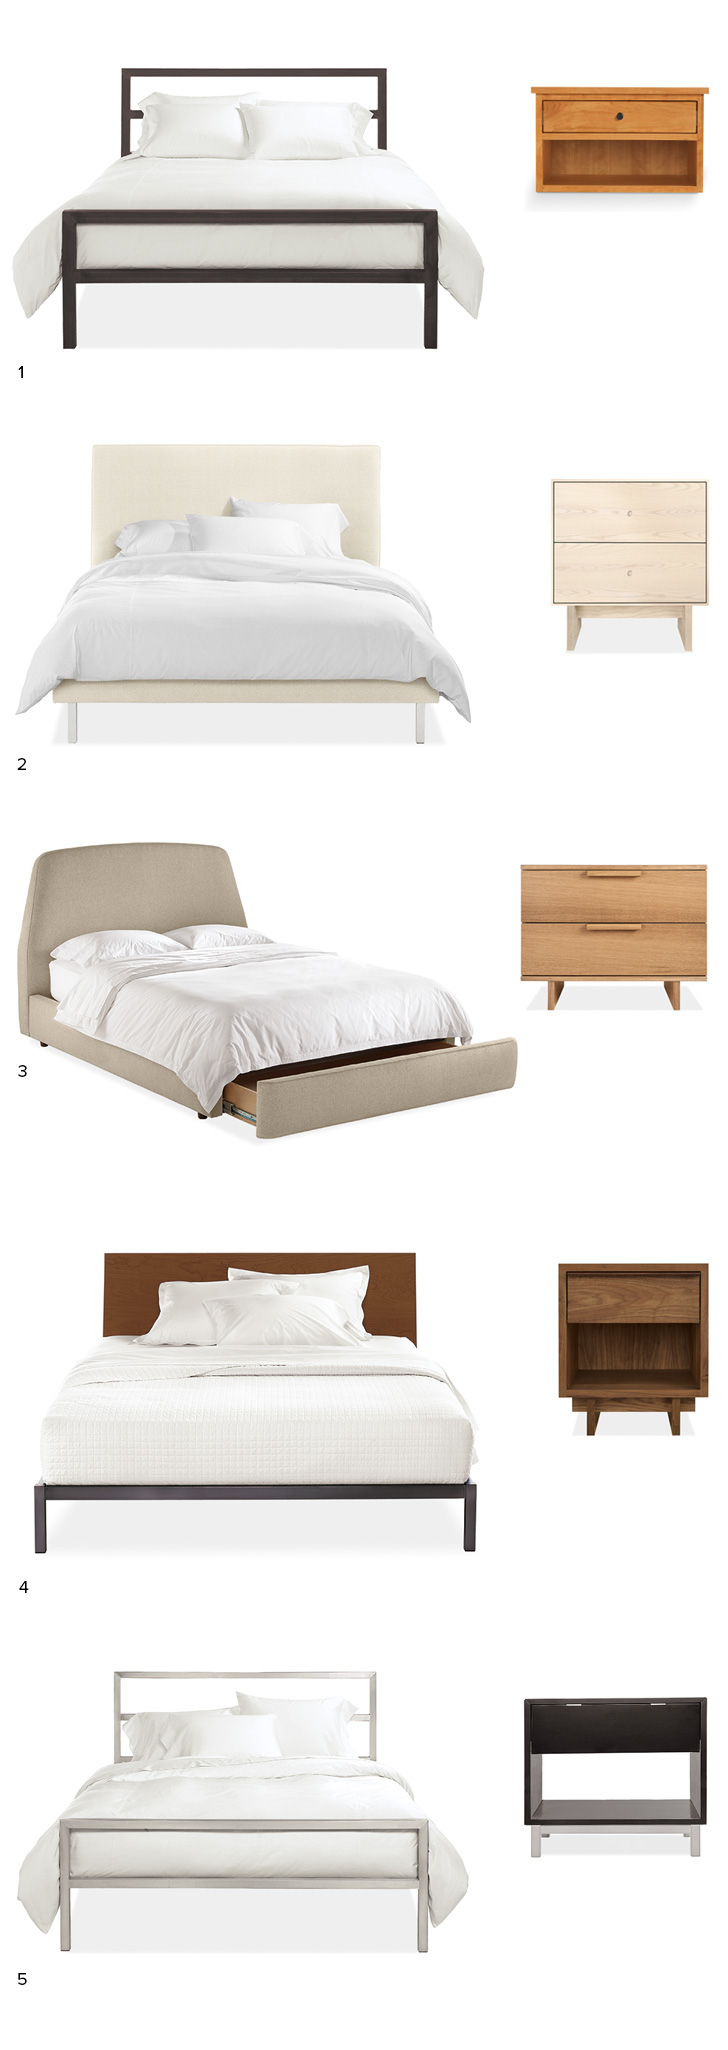 Bed and nightstand pairings